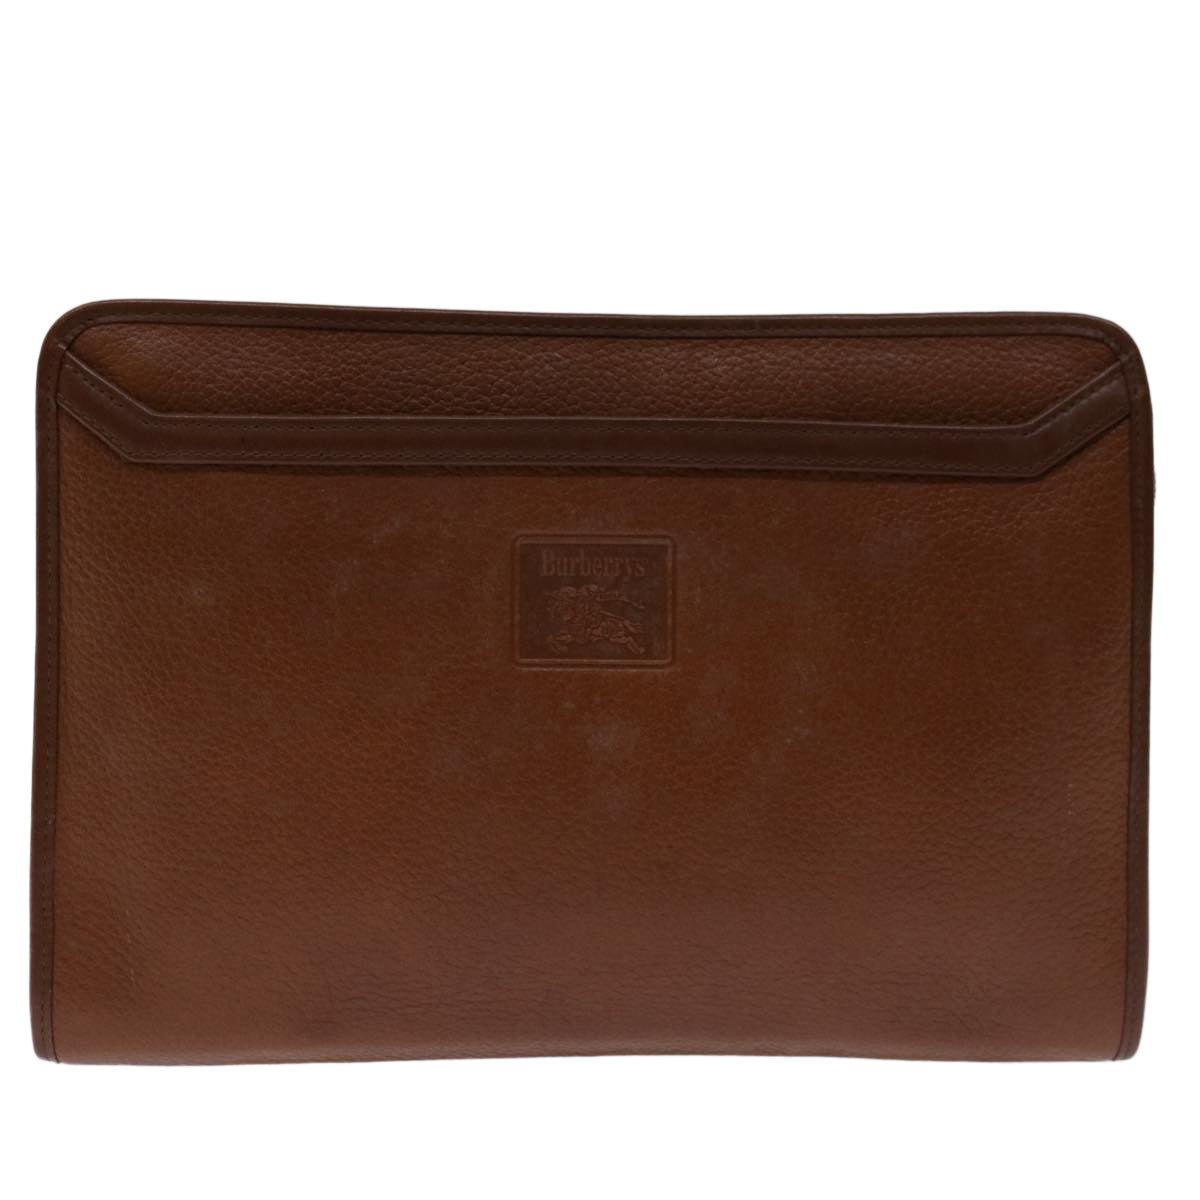 Burberrys Clutch Bag Leather Brown Auth bs12585 - 0